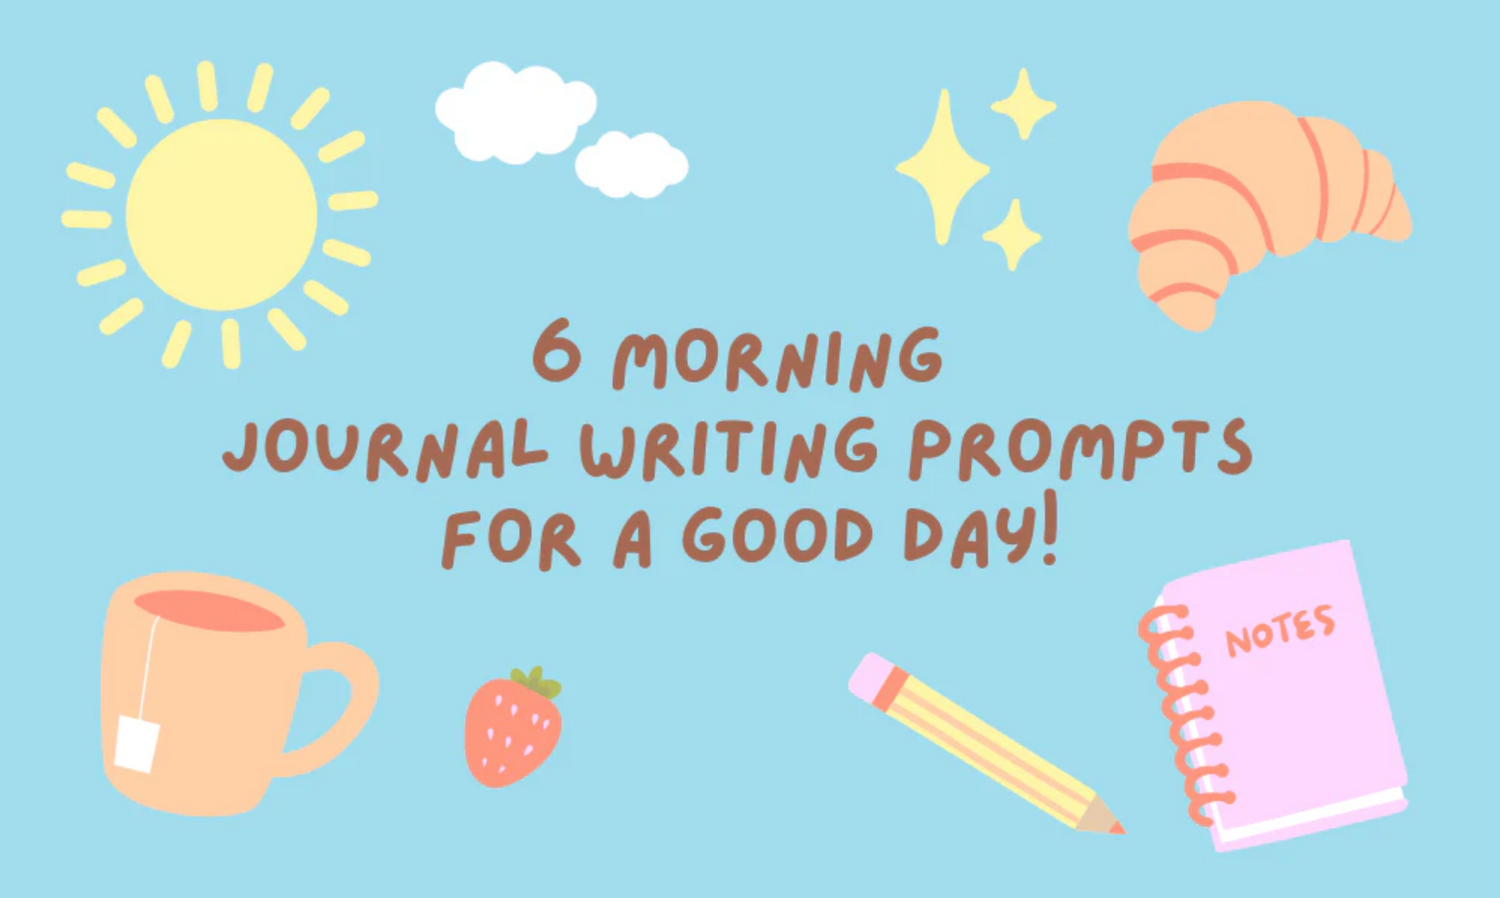 6 Morning Journal Writing Prompts